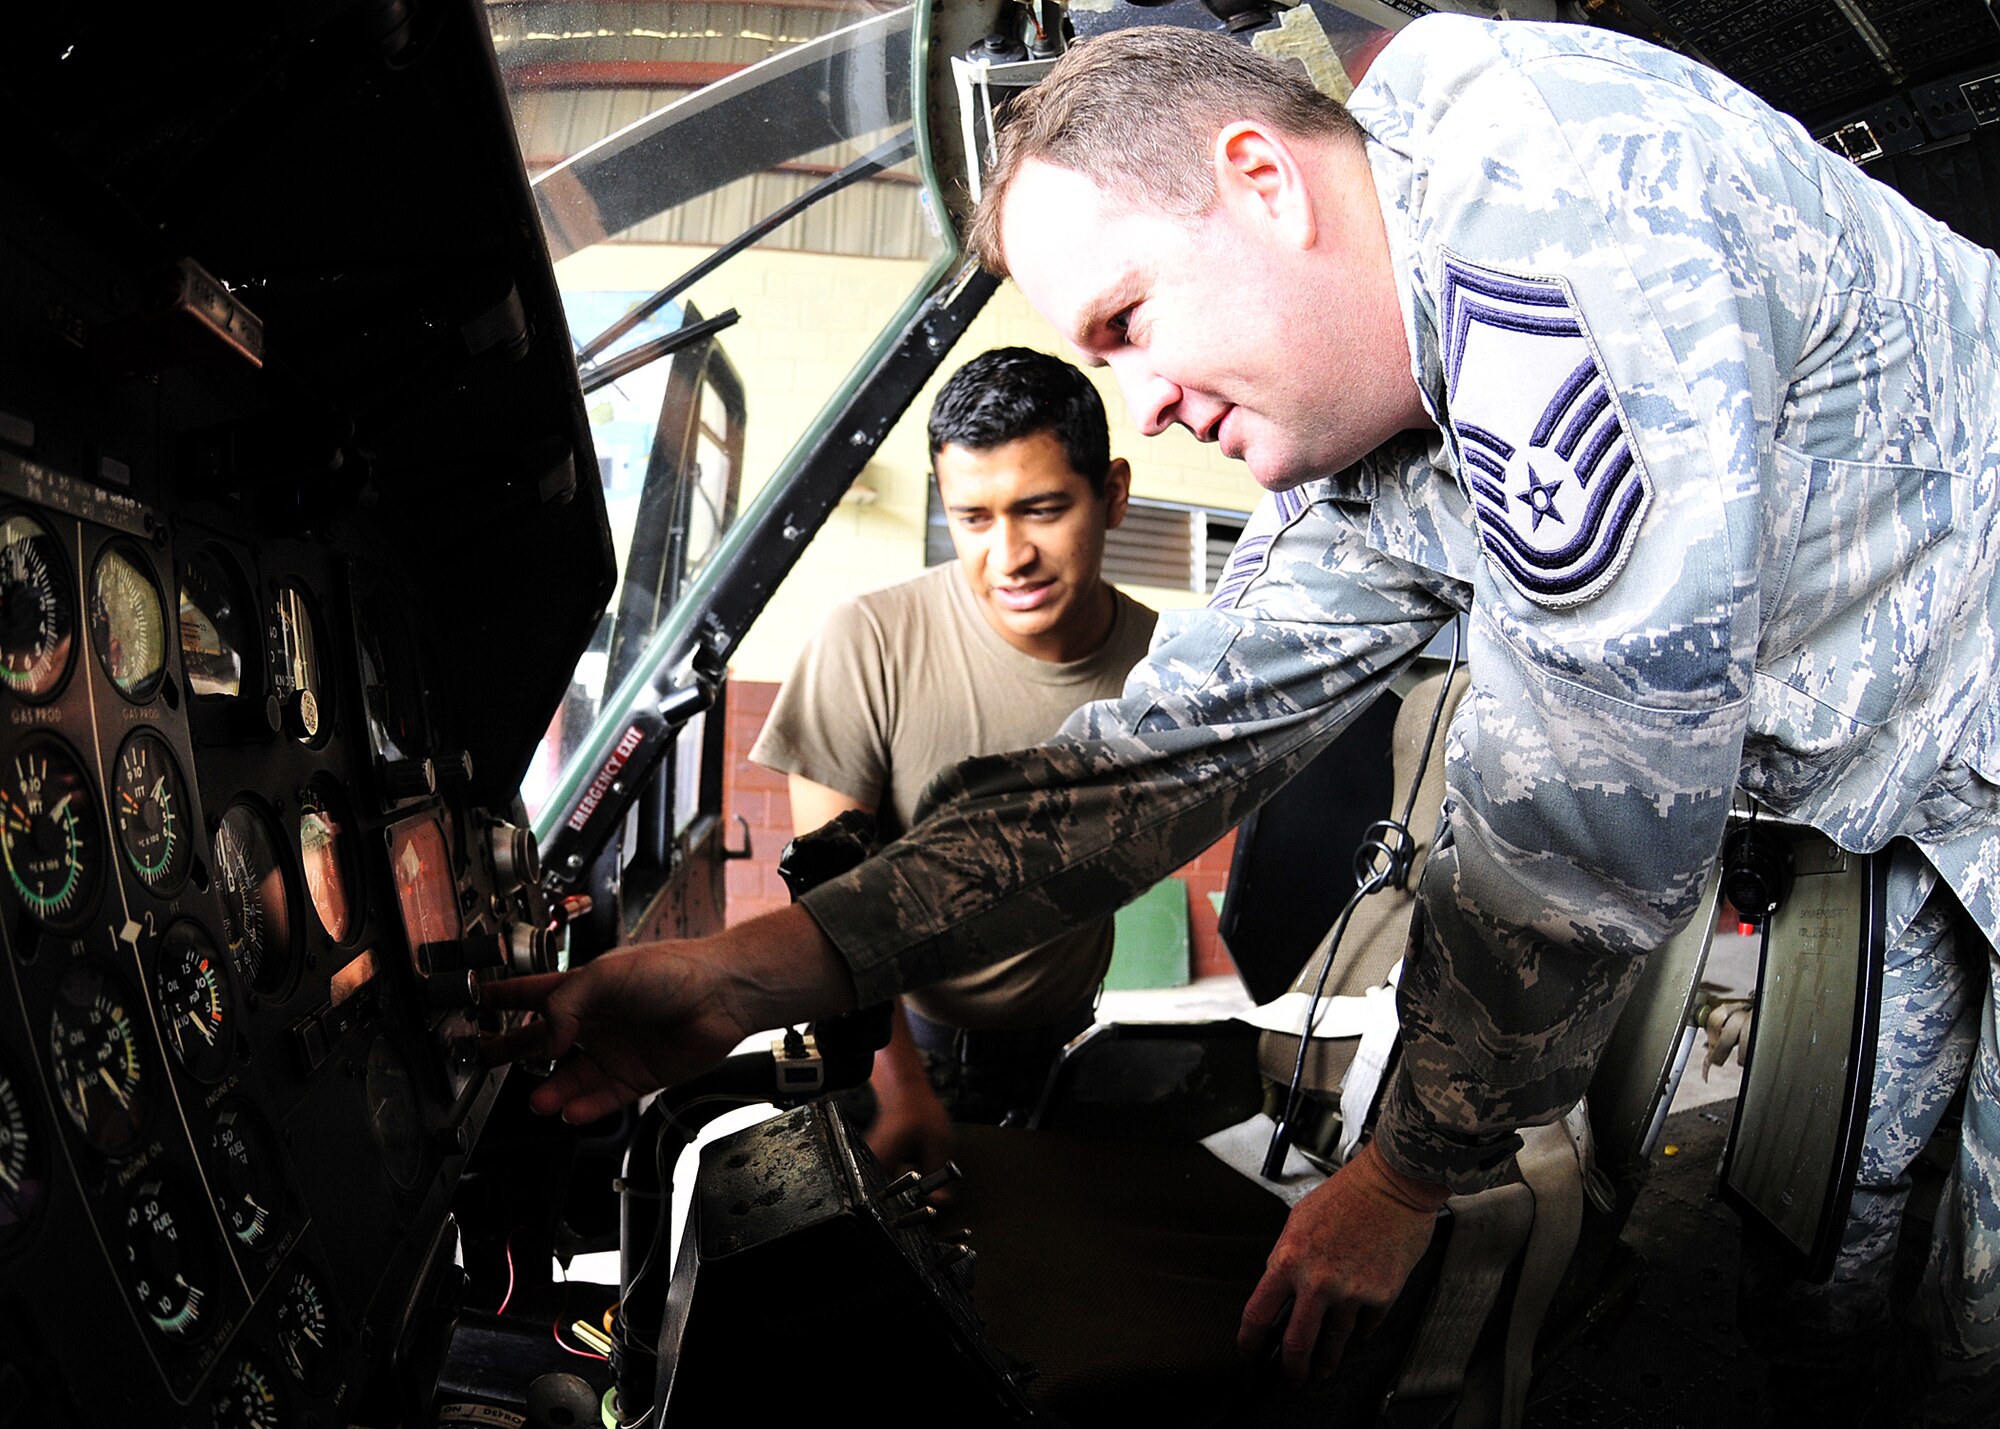 Senior Master Sgt. Hood, 571st Mission Support Advisory Squadron helicopter crew chief and air advisor, advises a Honduran Air Force member the proper installation of the radar altimeter indicator, in Tegucigalpa, Honduras, Feb. 3.  Radar altimeters are a component of terrain avoidance warning systems, warning the pilot if the aircraft is flying too low, or if there is rising terrain ahead. (U.S. Air Force photo by Tech. Sgt. Lesley Waters)